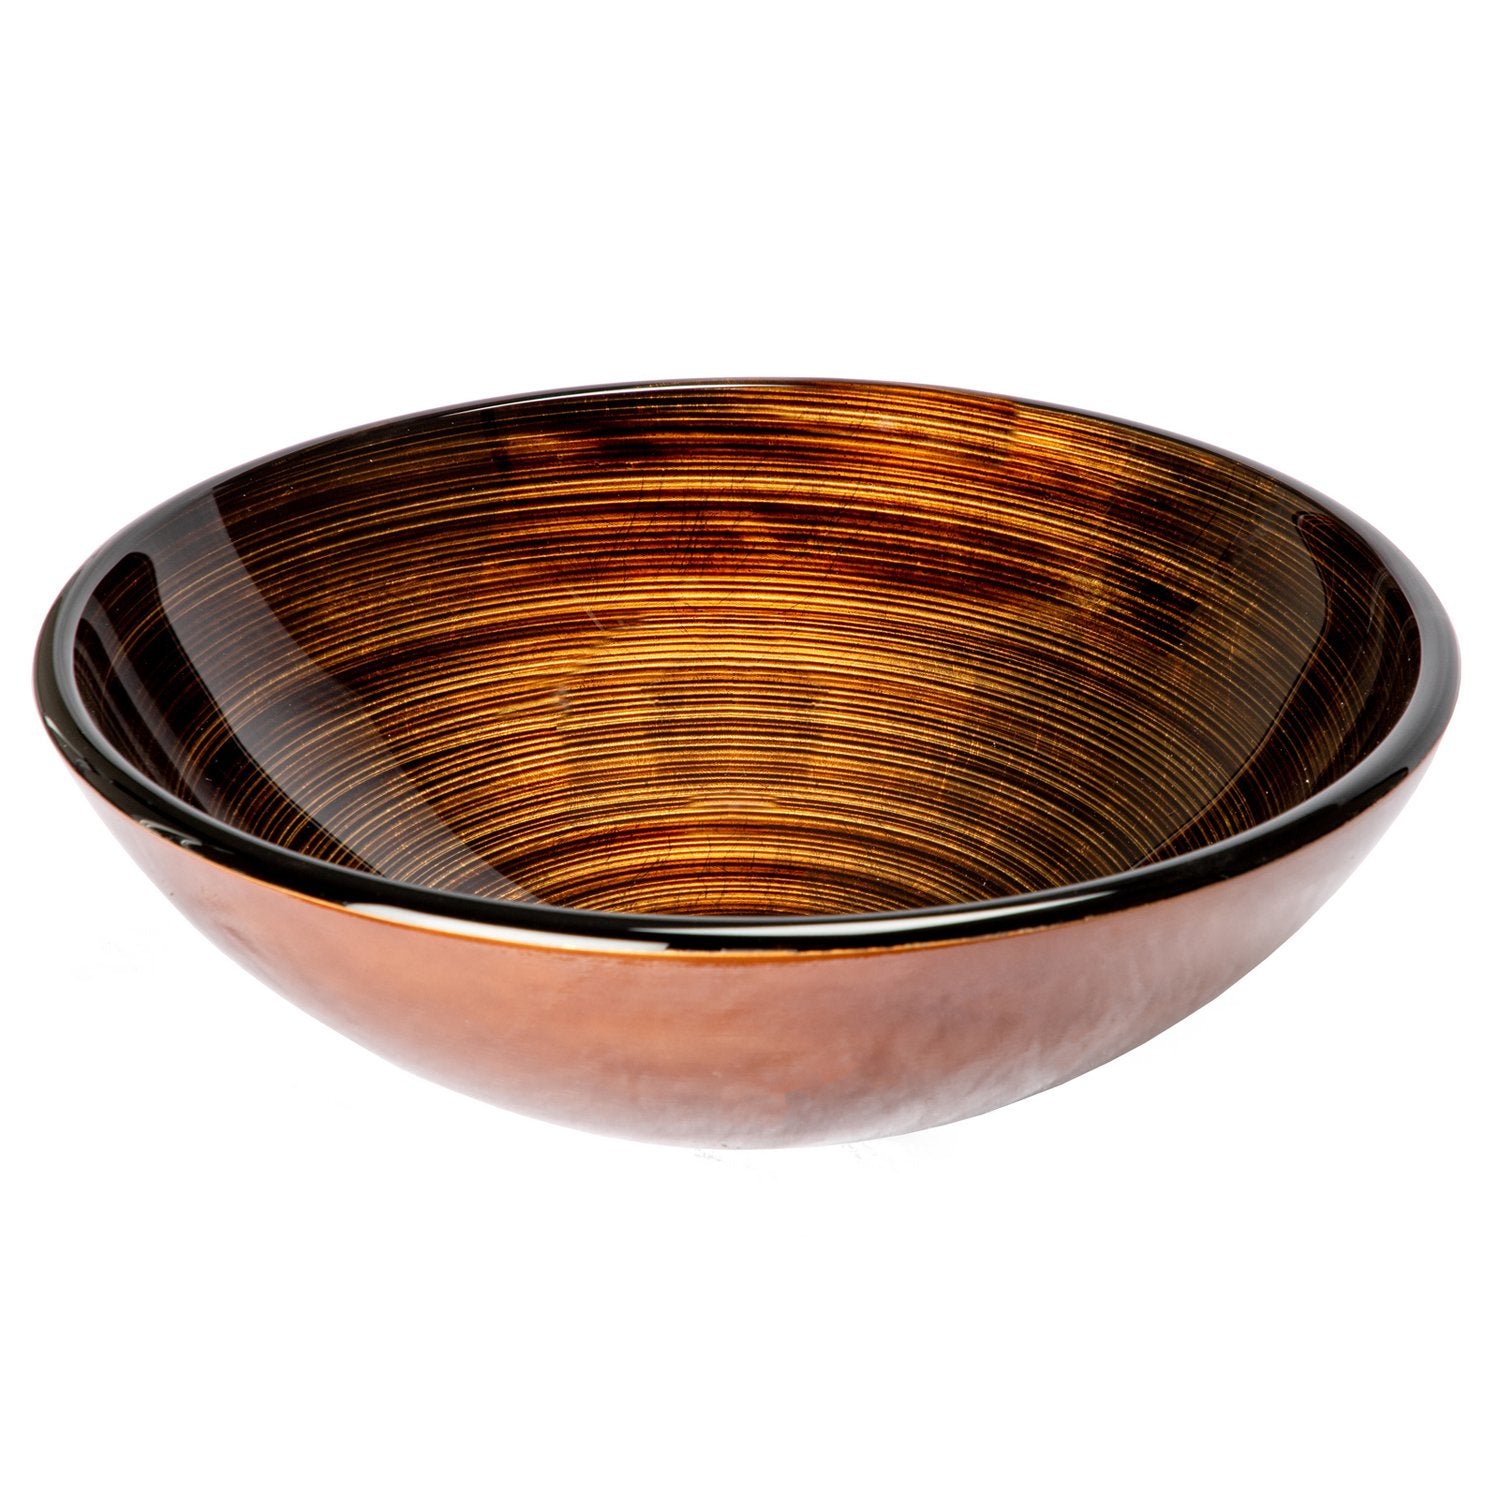 Eden Bath Brown and Gold Rings Glass Vessel Sink